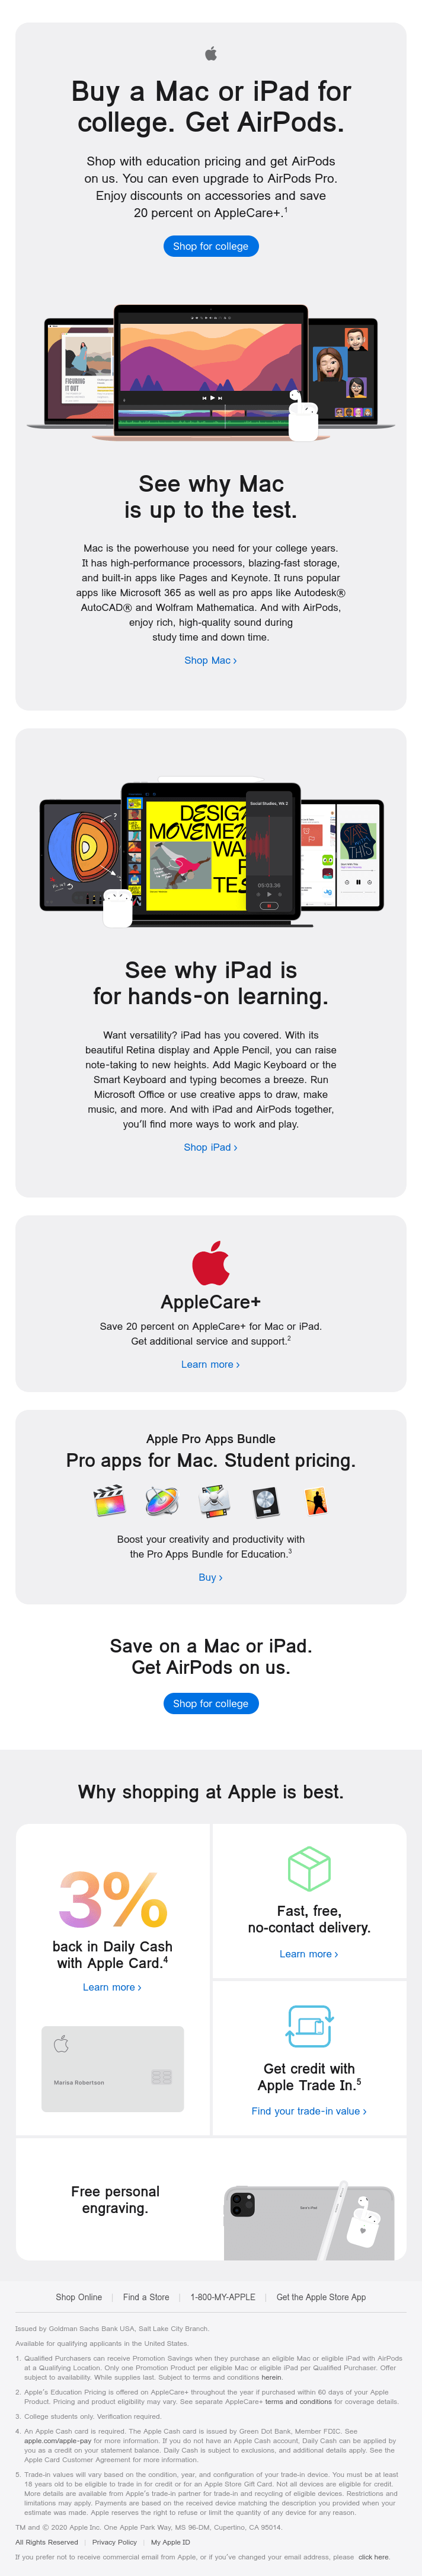 Get the most out of college when you shop for a Mac or iPad.